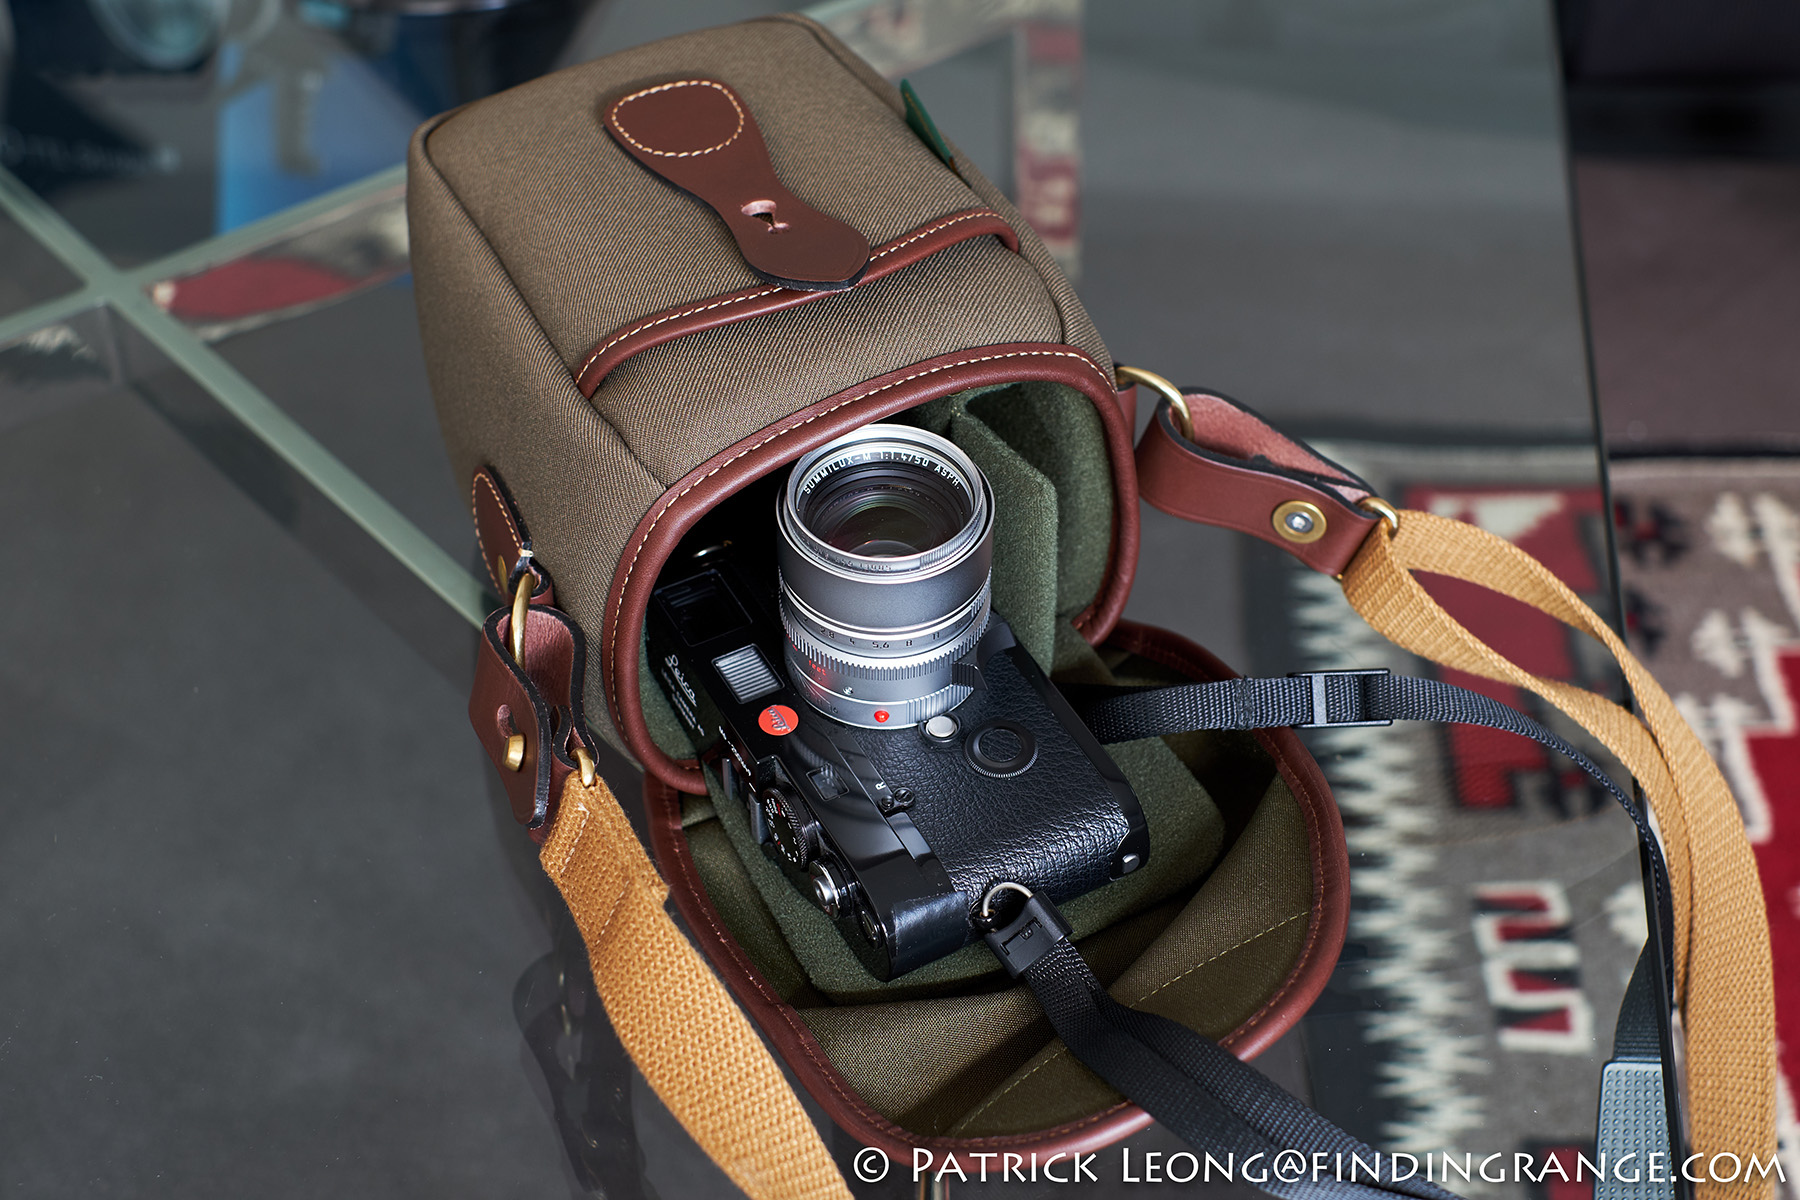 Review: Billingham 72, single-camera bag for Leica Q, Sony RX1 and